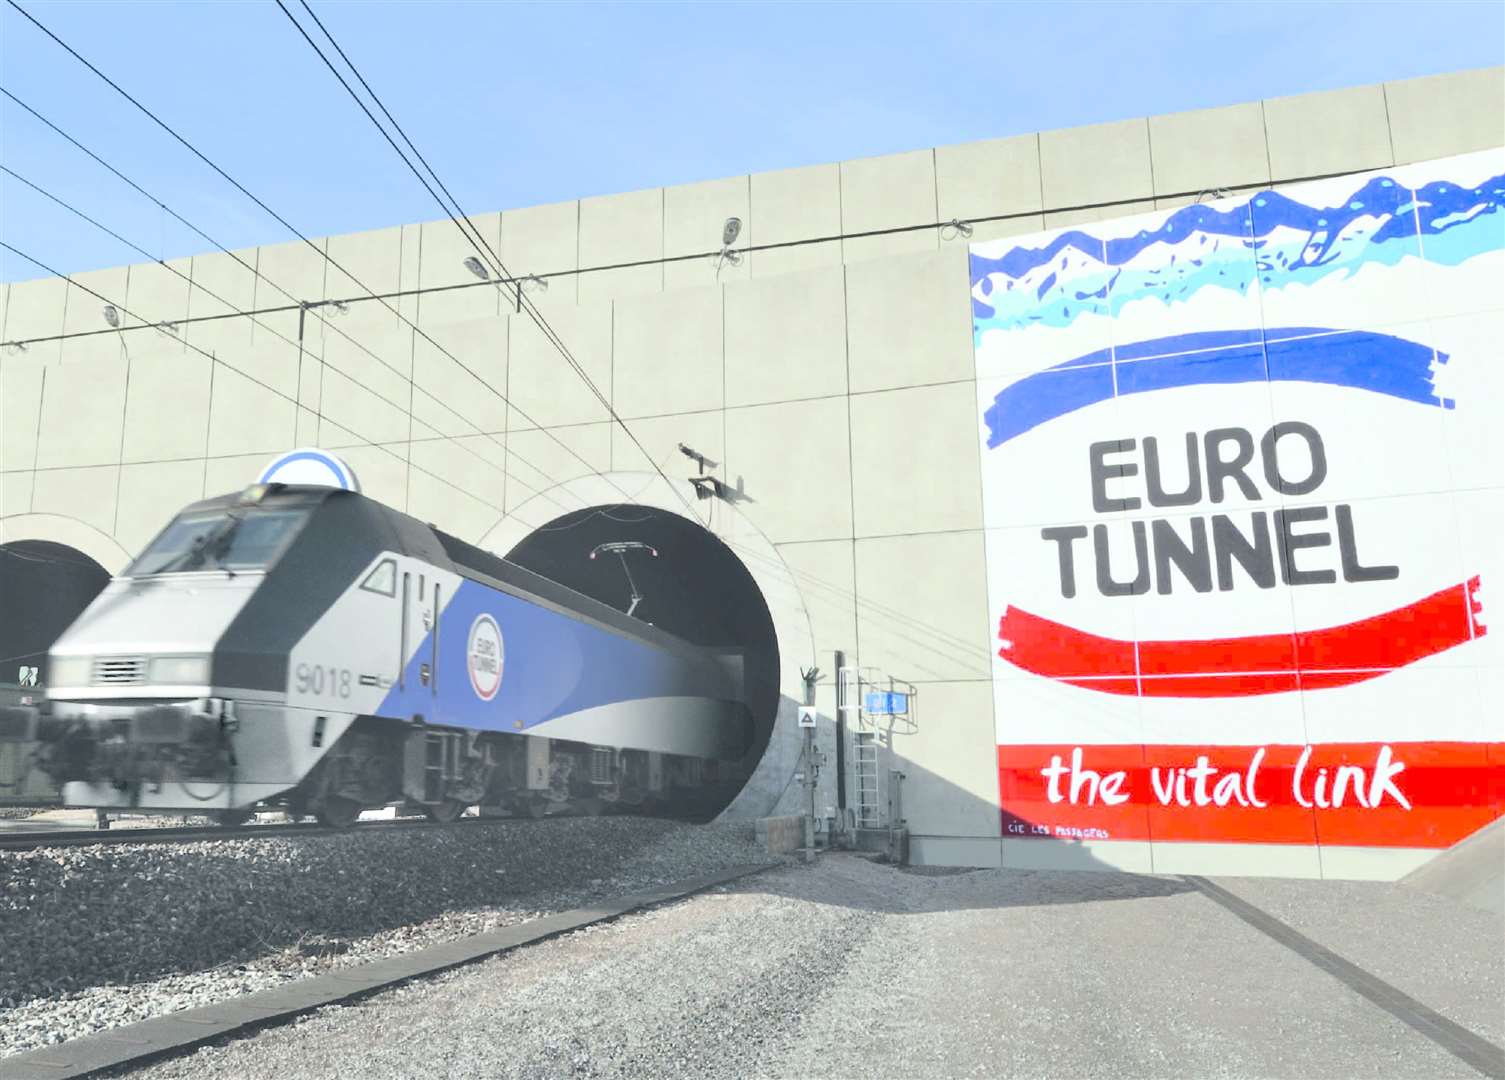 Eurotunnel saw a huge year-on-year growth for the month of March - due to last year's travel restrictions and last month's suspension of P&O services